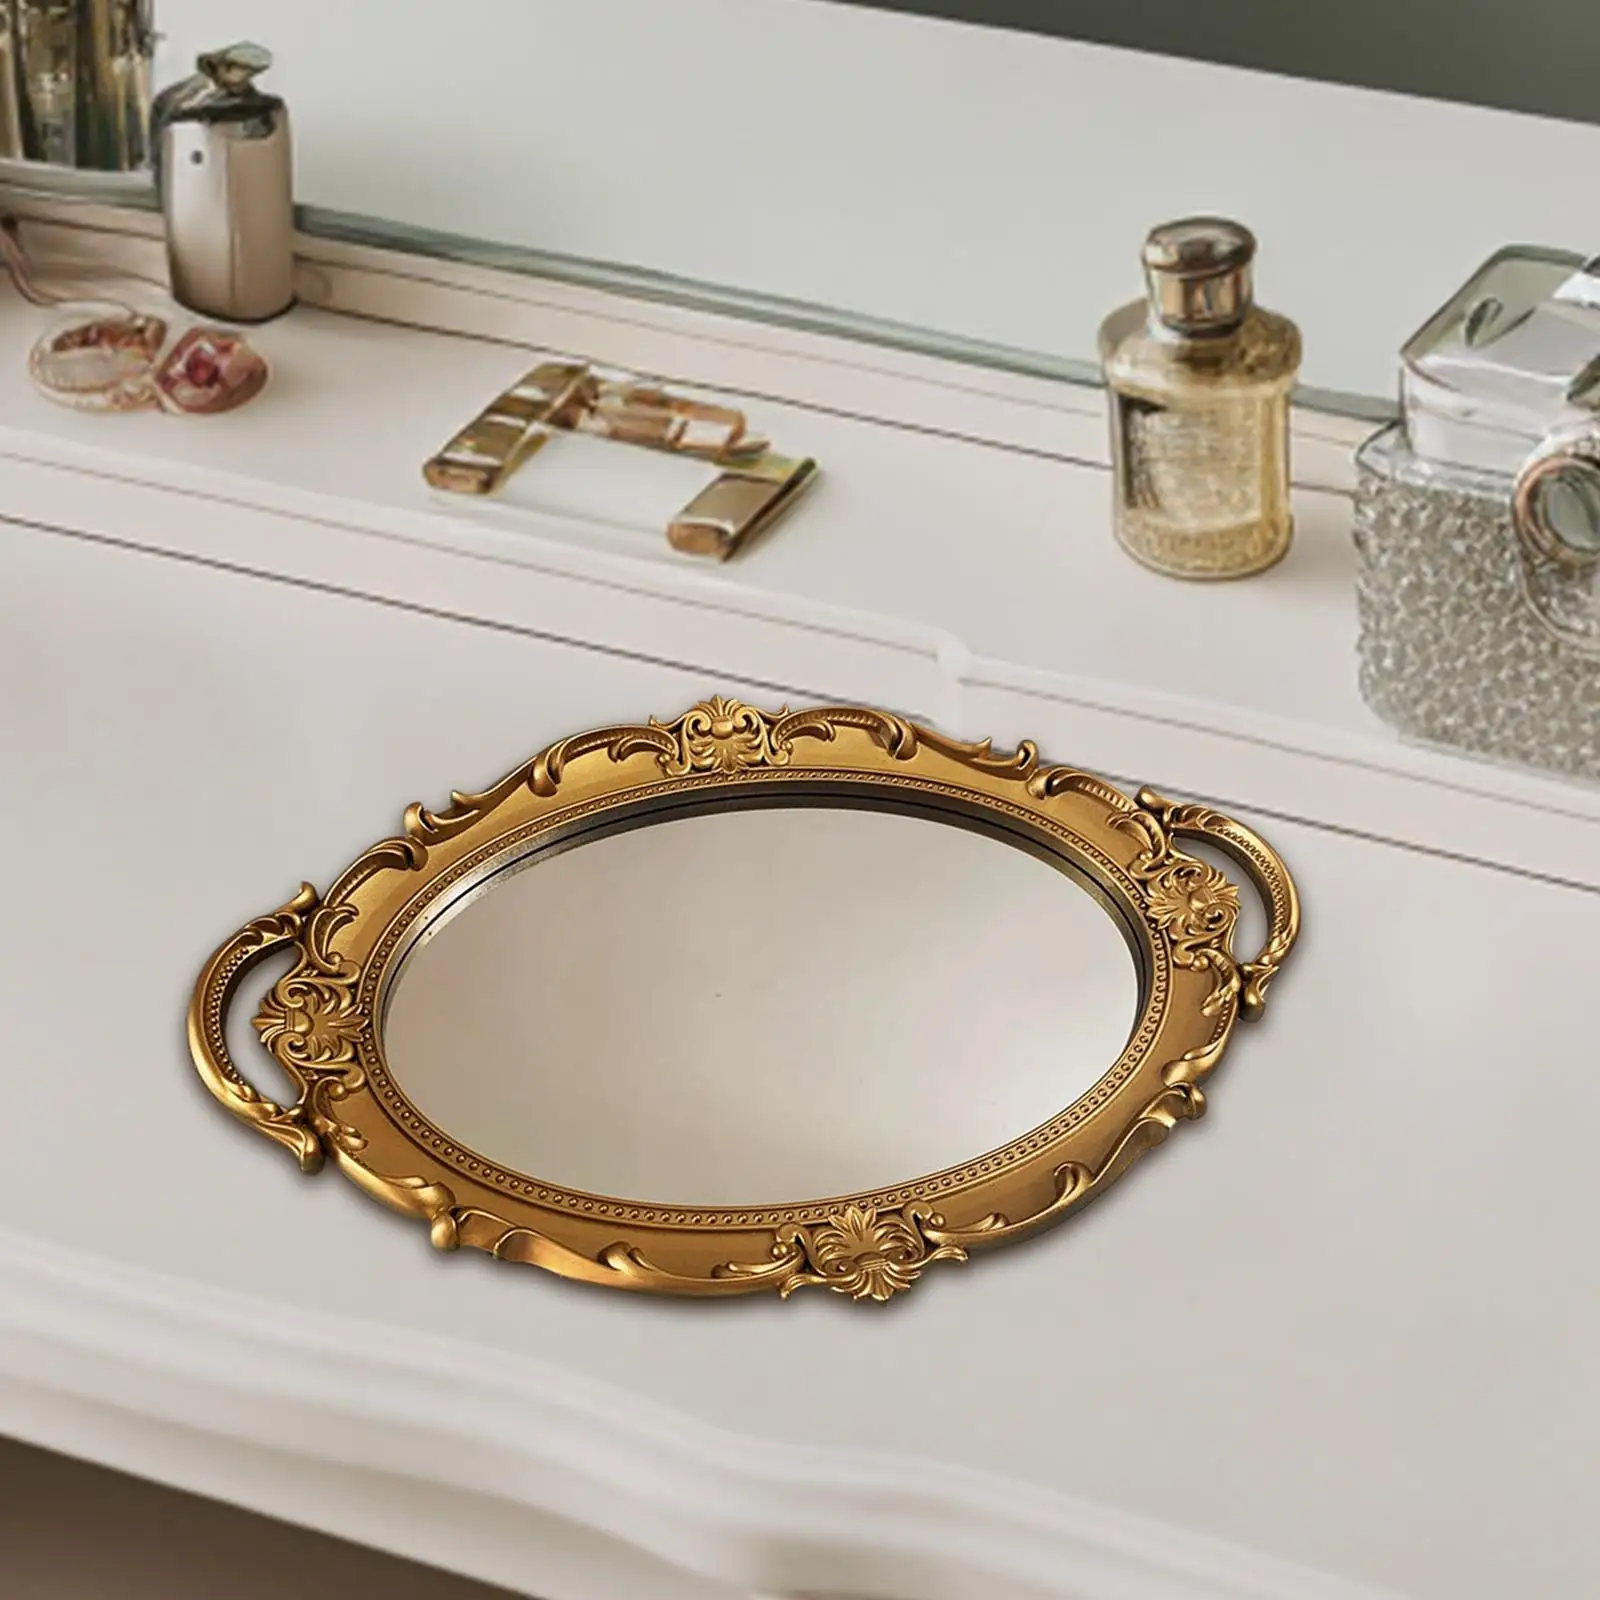 Decorative Mirror Tray Earrings Necklace Display Plates for Desk Desktop